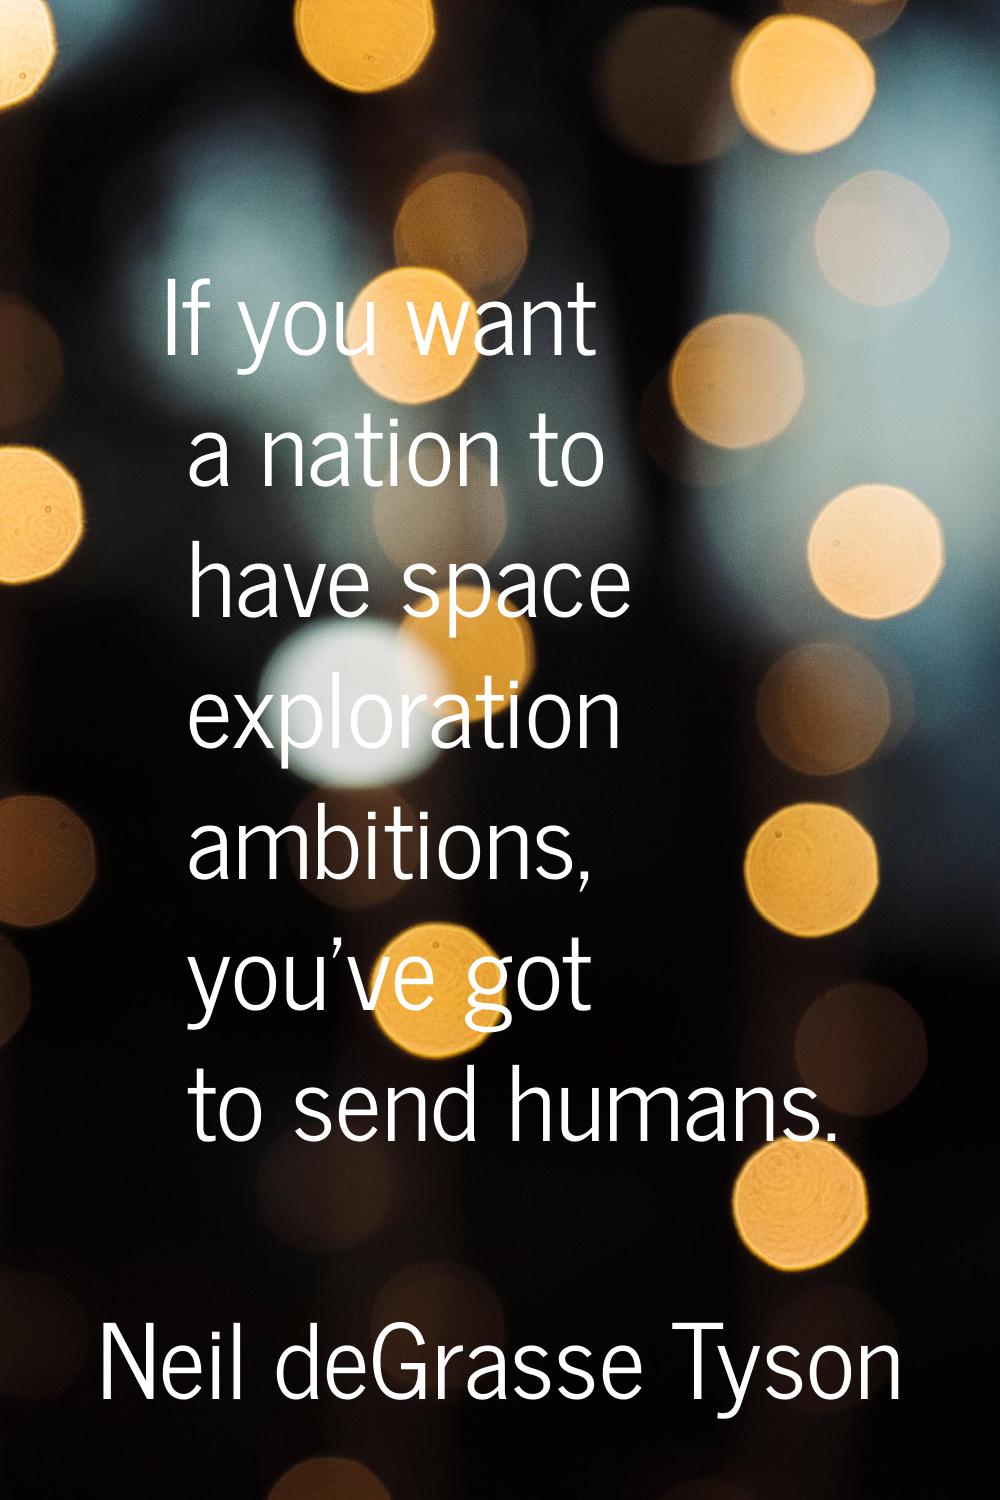 If you want a nation to have space exploration ambitions, you've got to send humans.